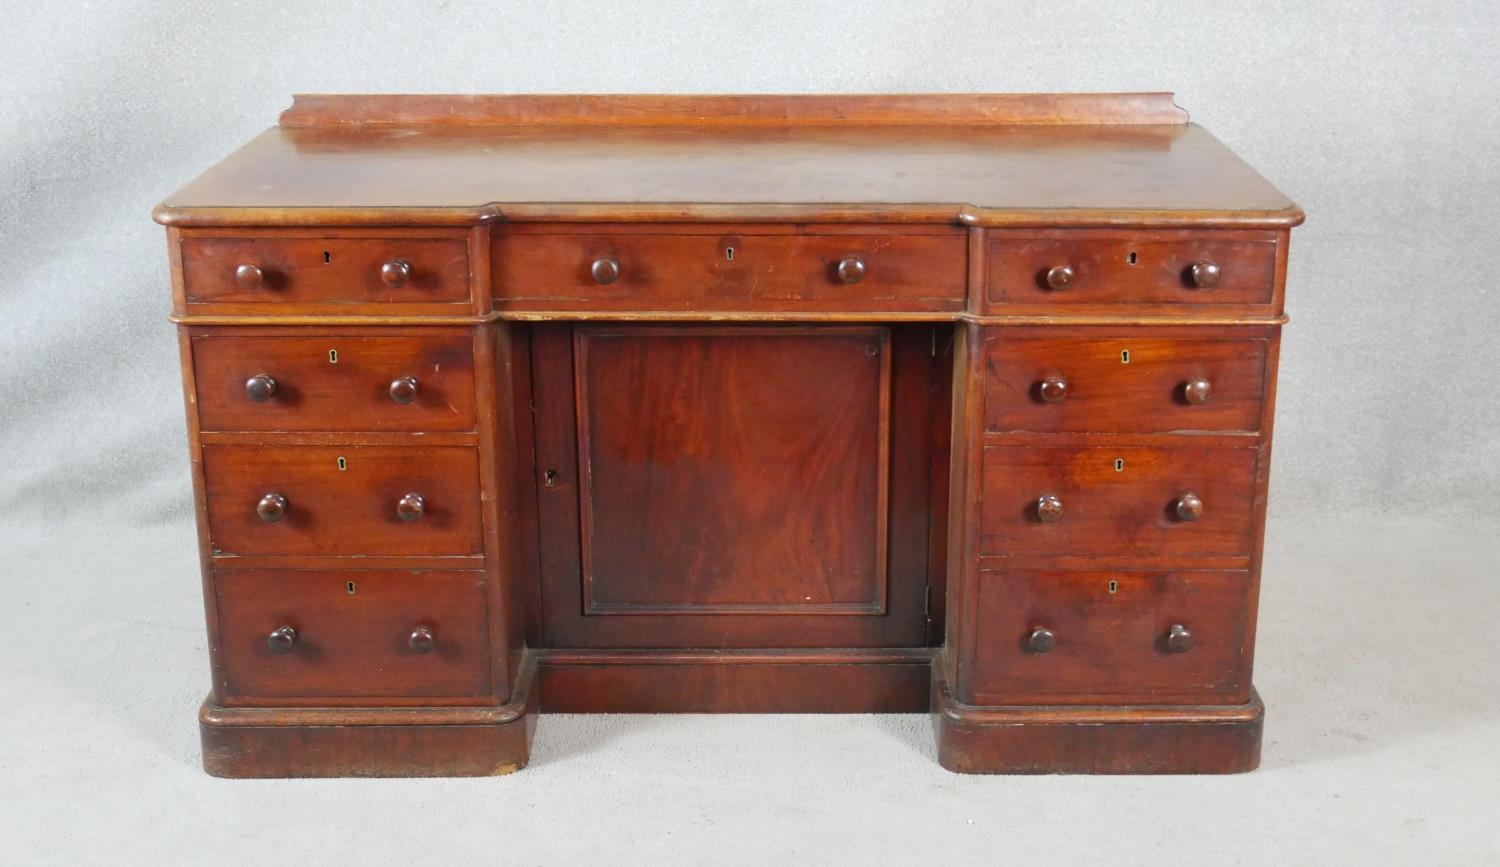 A 19th century mahogany pedestal desk with an arrangement of drawers and kneehole cupboard on plinth